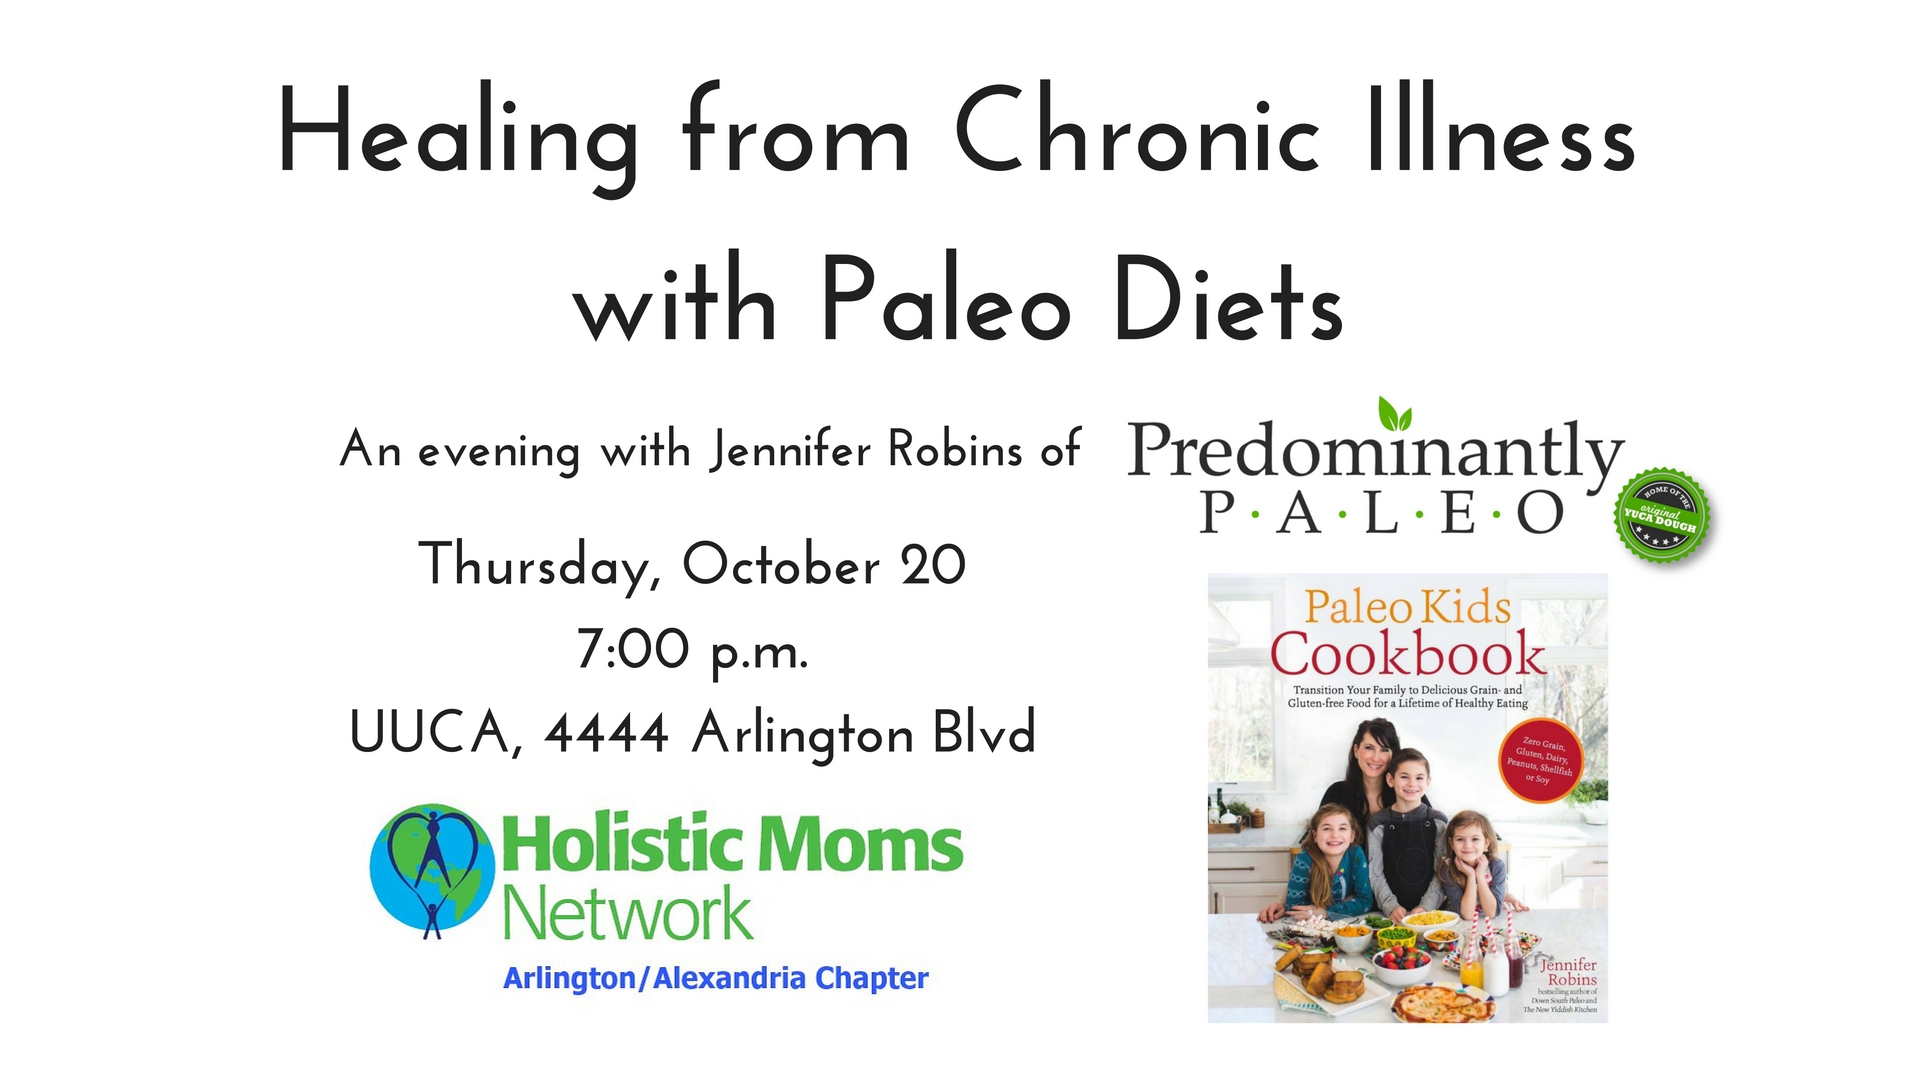 Healing from Chronic Illness with Paleo Diets-An evening with Jennifer Robins